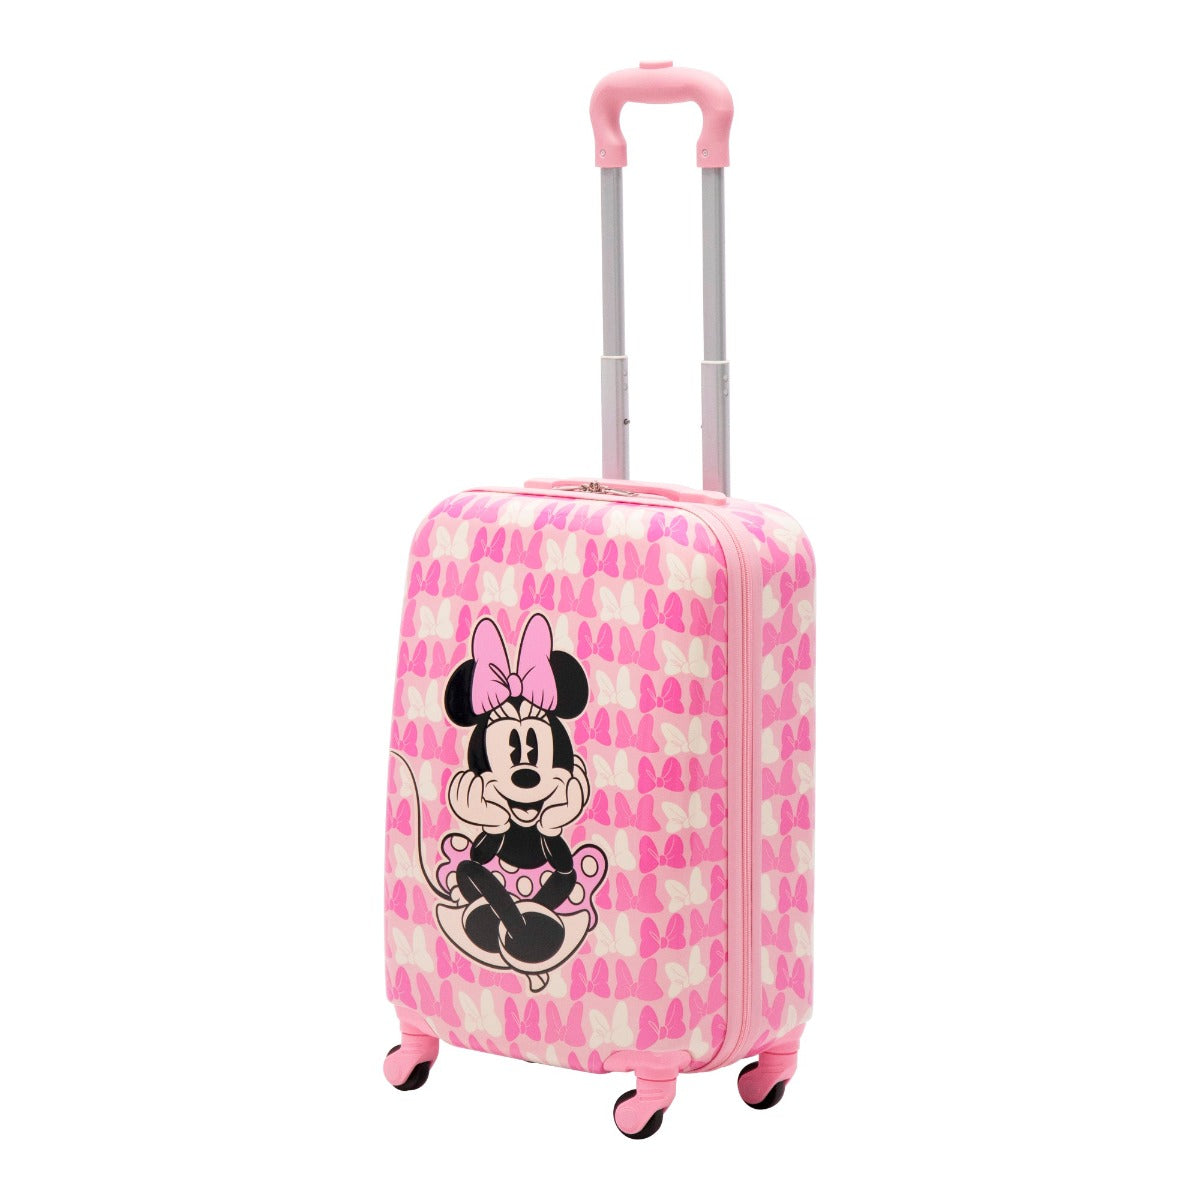 Ful Minnie Mouse Bows Print Hardside Spinner Suitcase - 20.5 inch Pink Carry On Kids Disney Luggage 